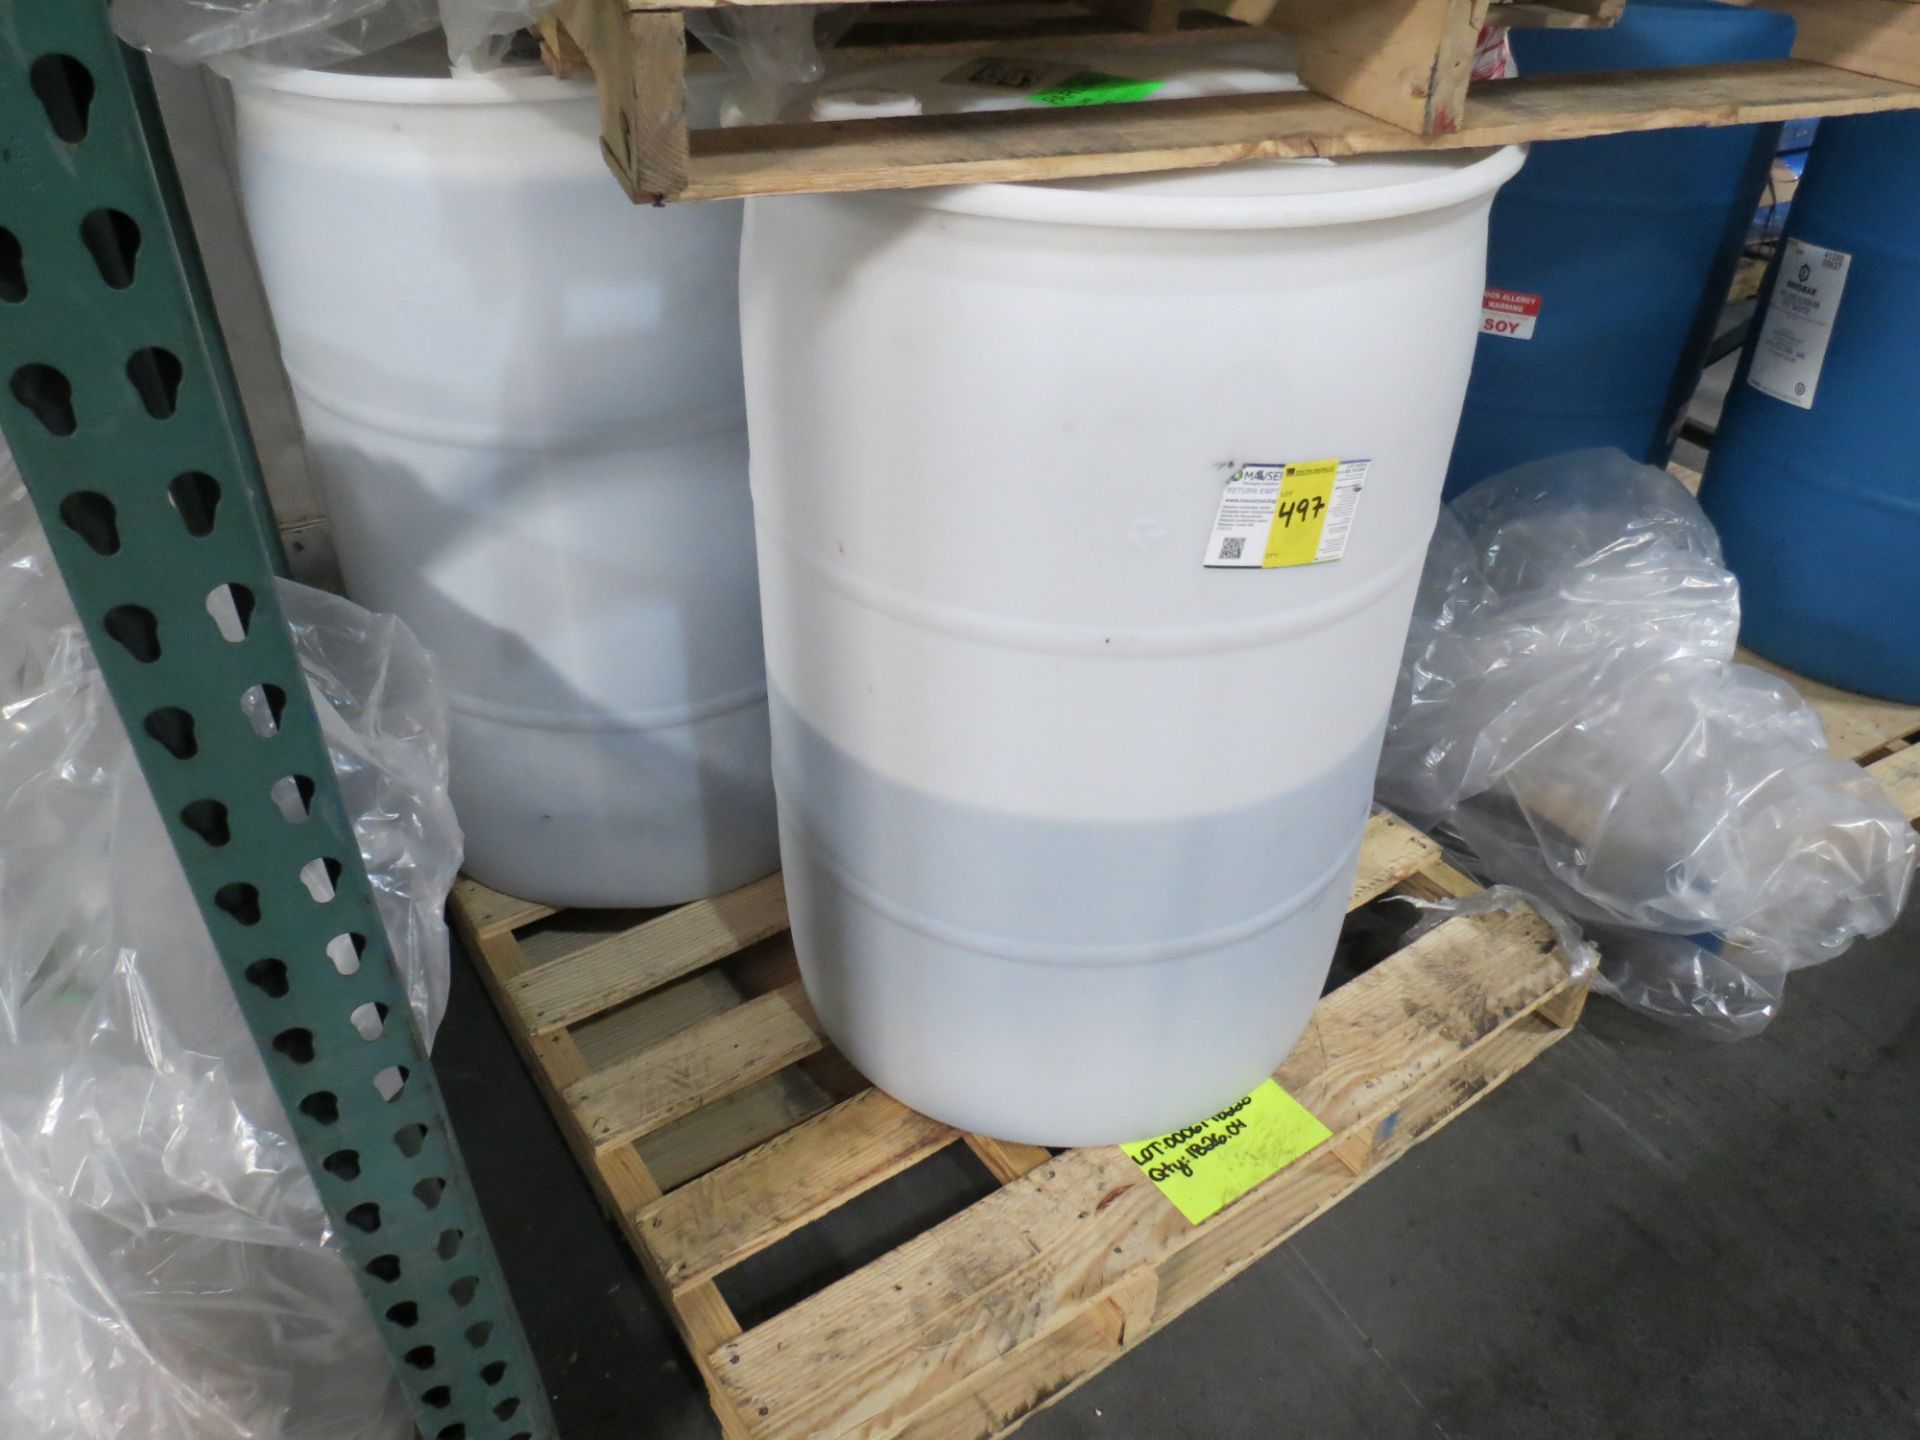 Lot (Approx. 2.5) 55 Gallon Drums of 24 Proof Kosher Burgandy Wine (Best By 7/18/23)